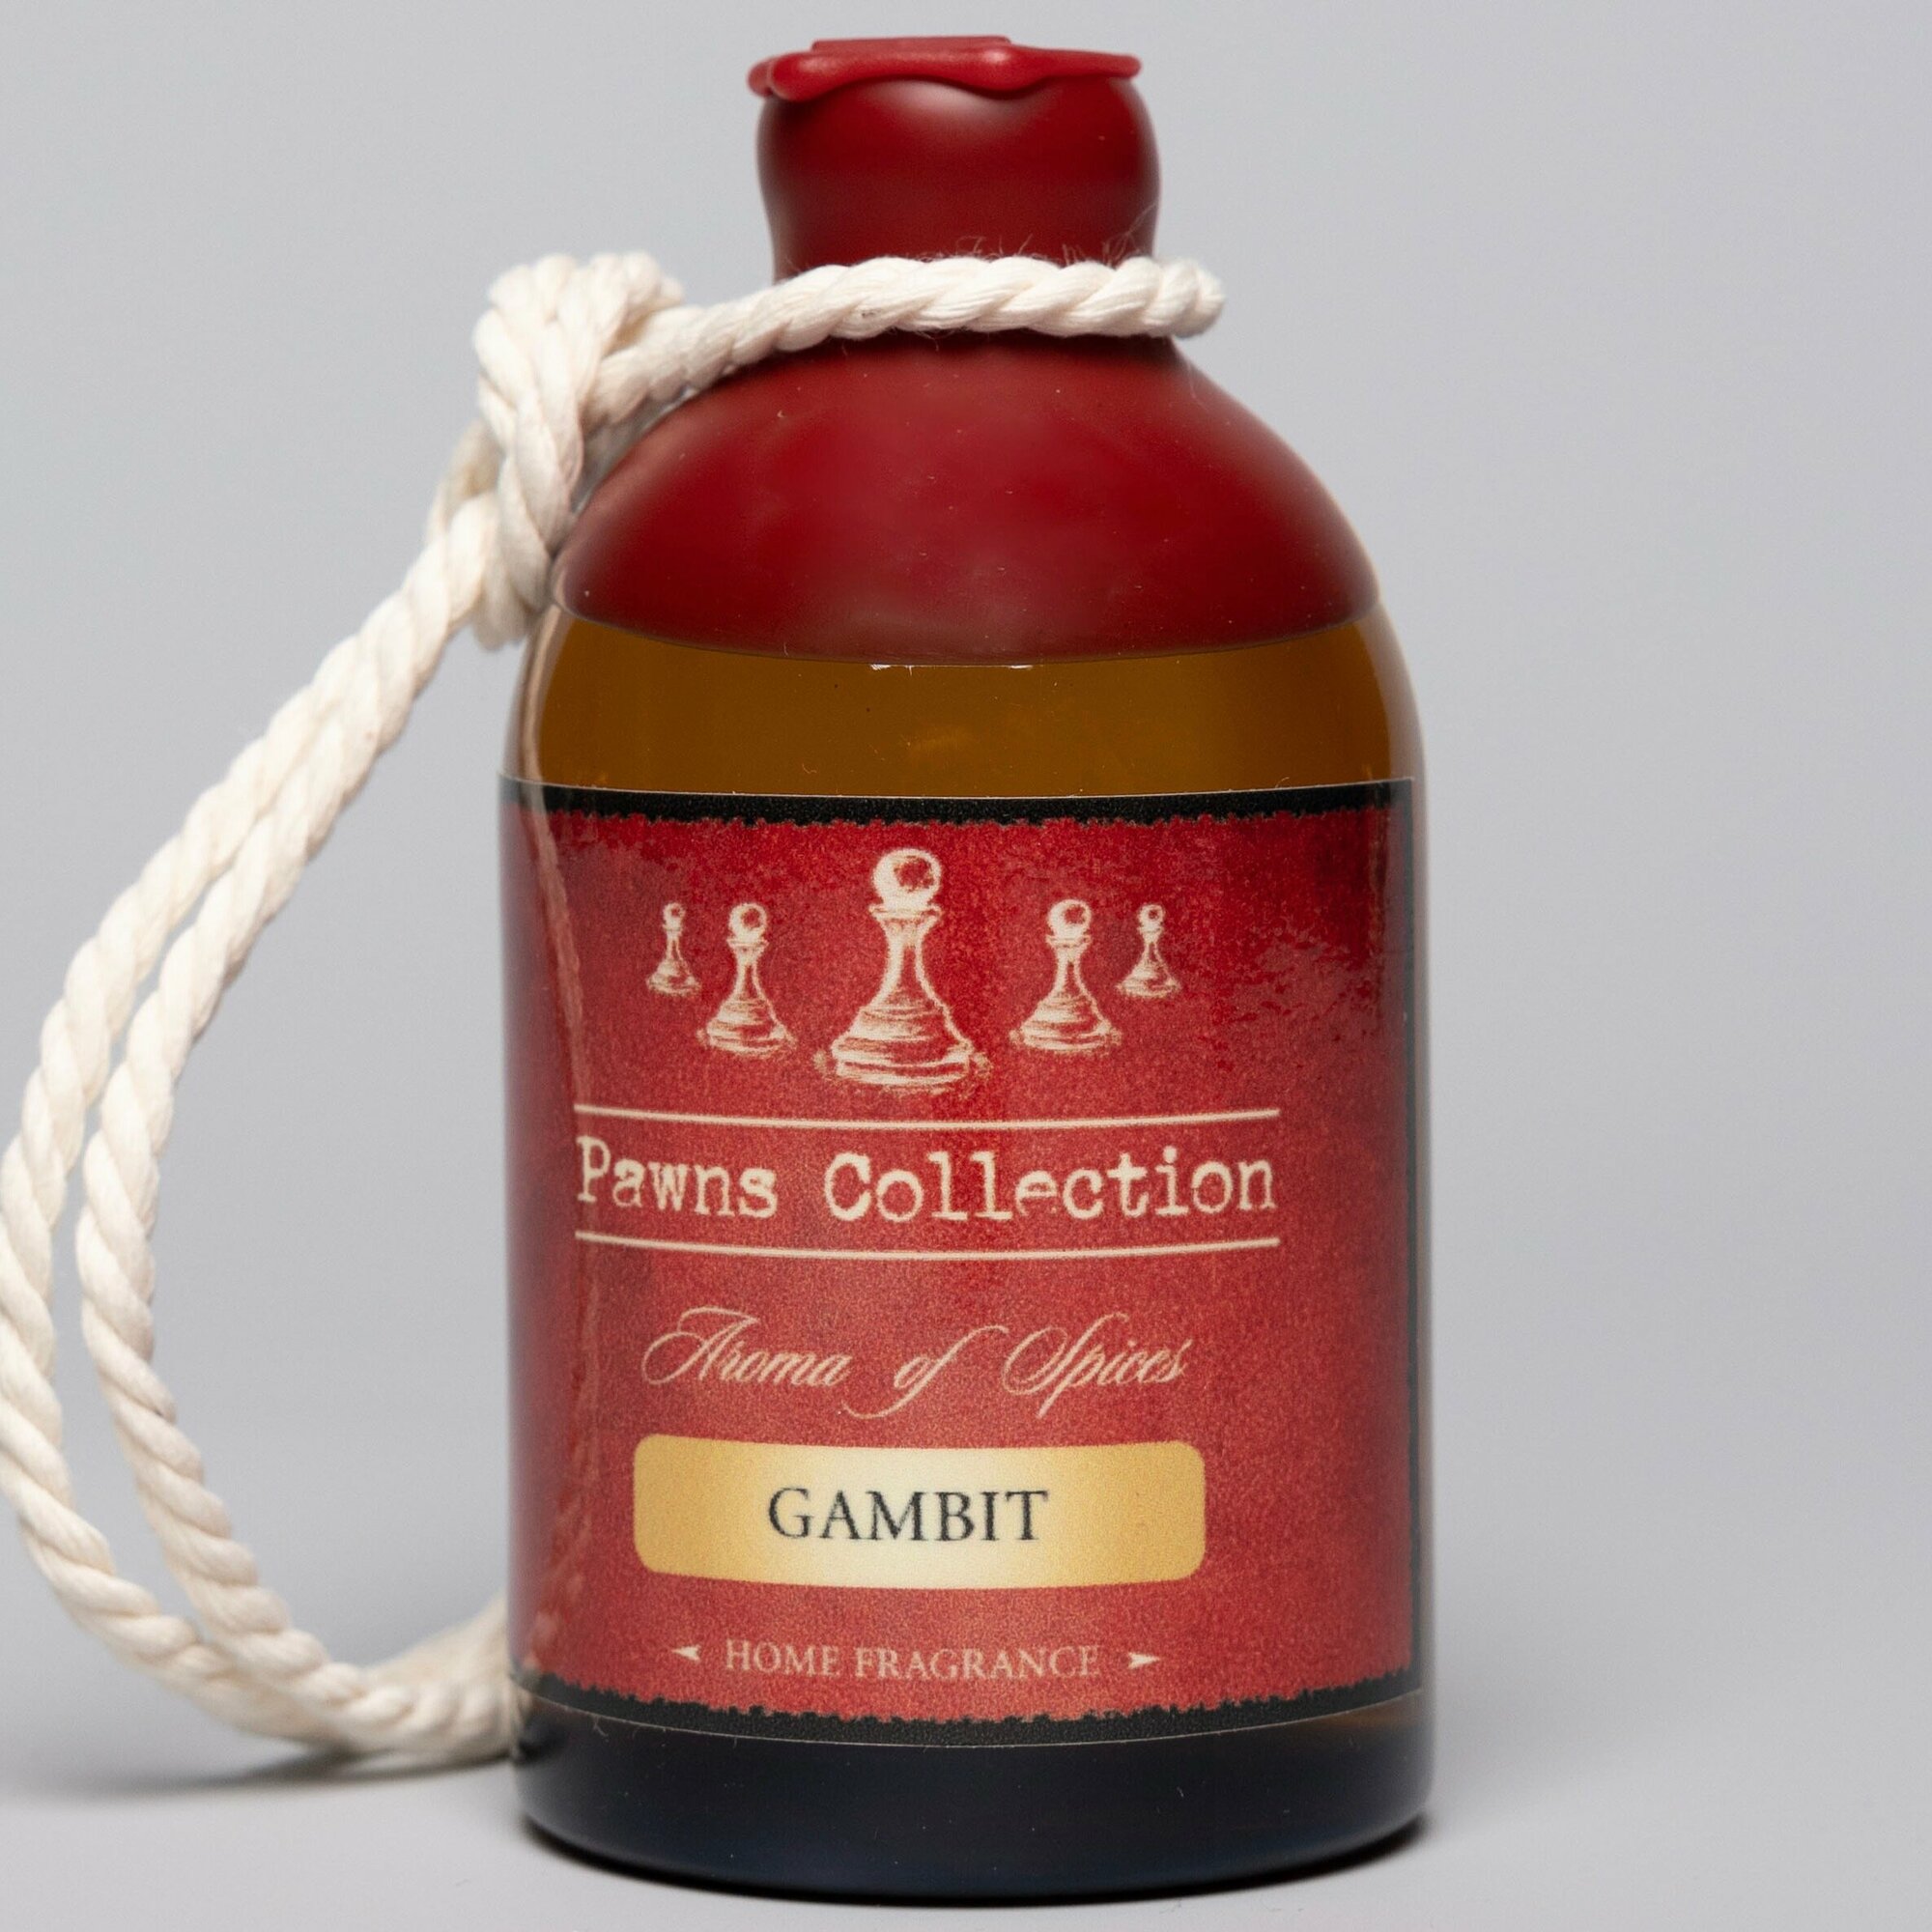 Аромадиффузор Pawns Collection Aroma of Spices